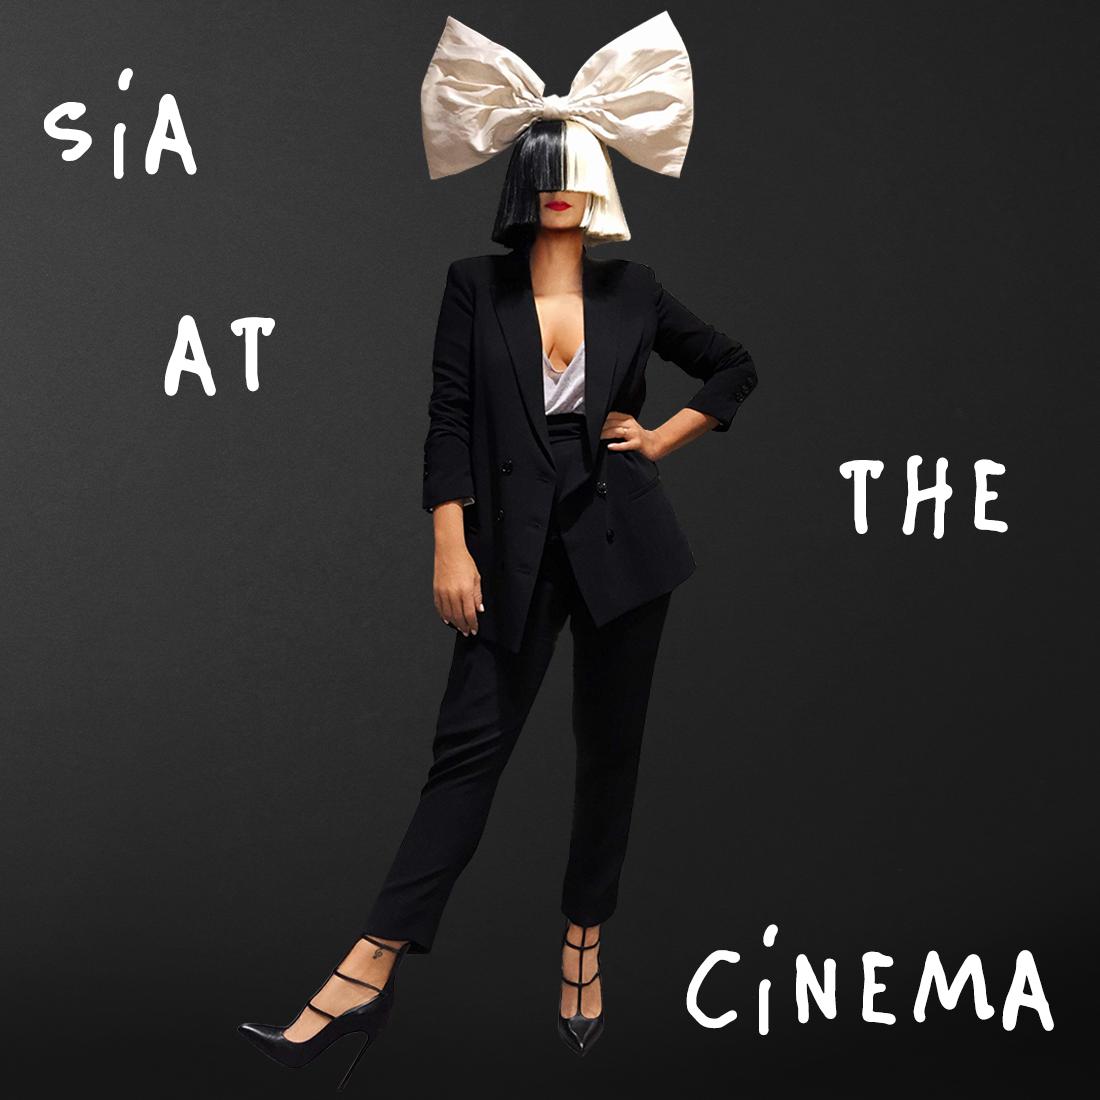 Time for some Sia at the Cinema on @Spotify ???? https://t.co/uOhiRePrsI - Team Sia https://t.co/eCpaEG2uDP